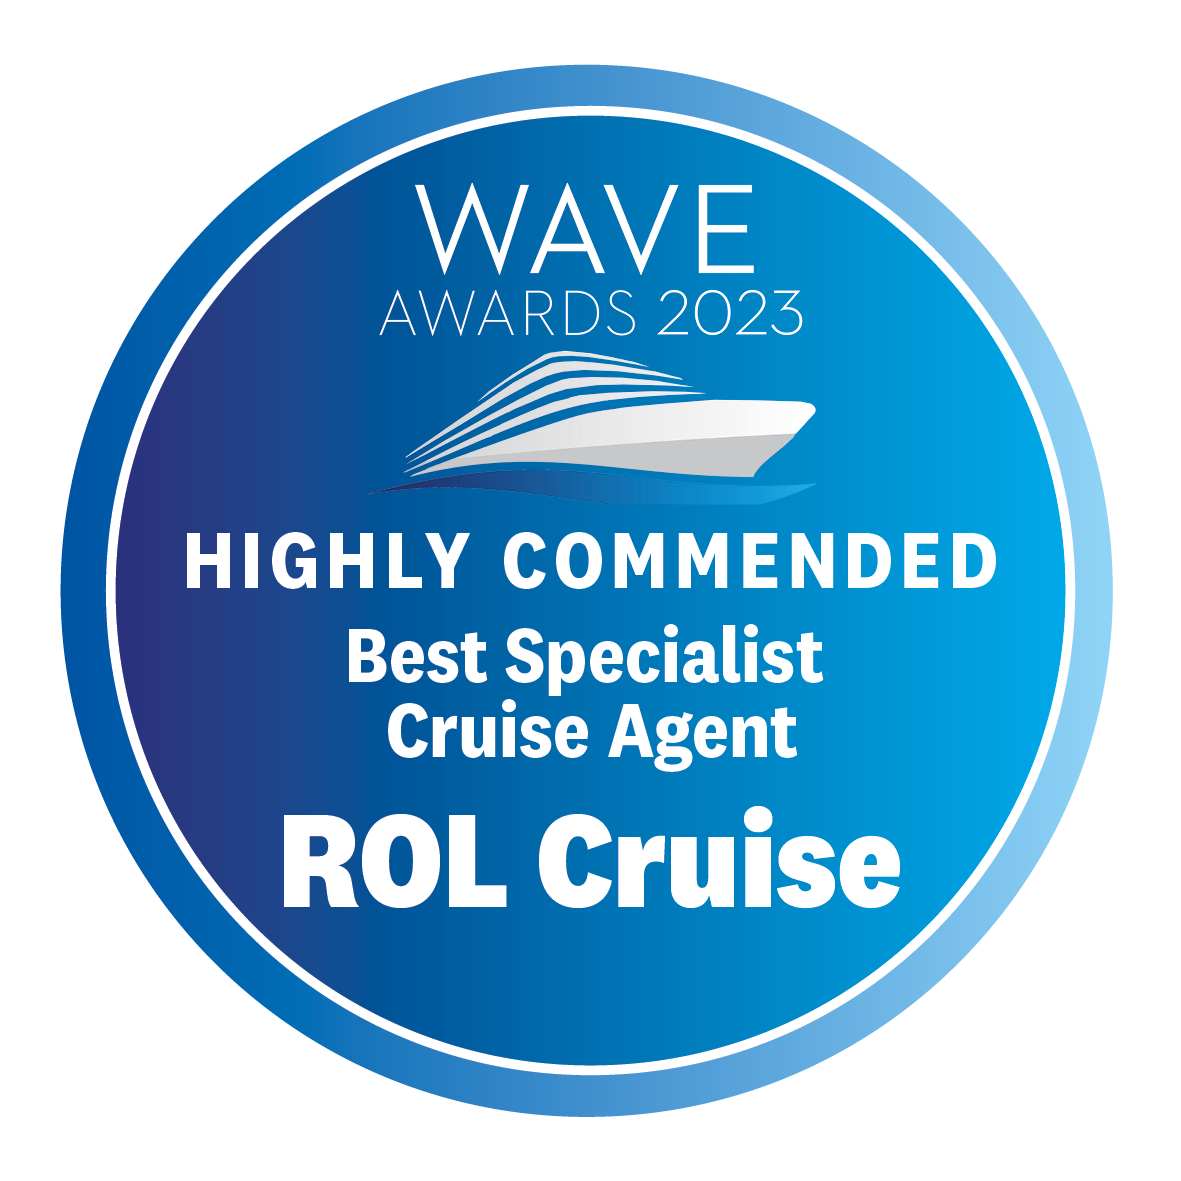 Wave Awards 2023 - Highly Commended Best Cruise Specialist Cruise Agent